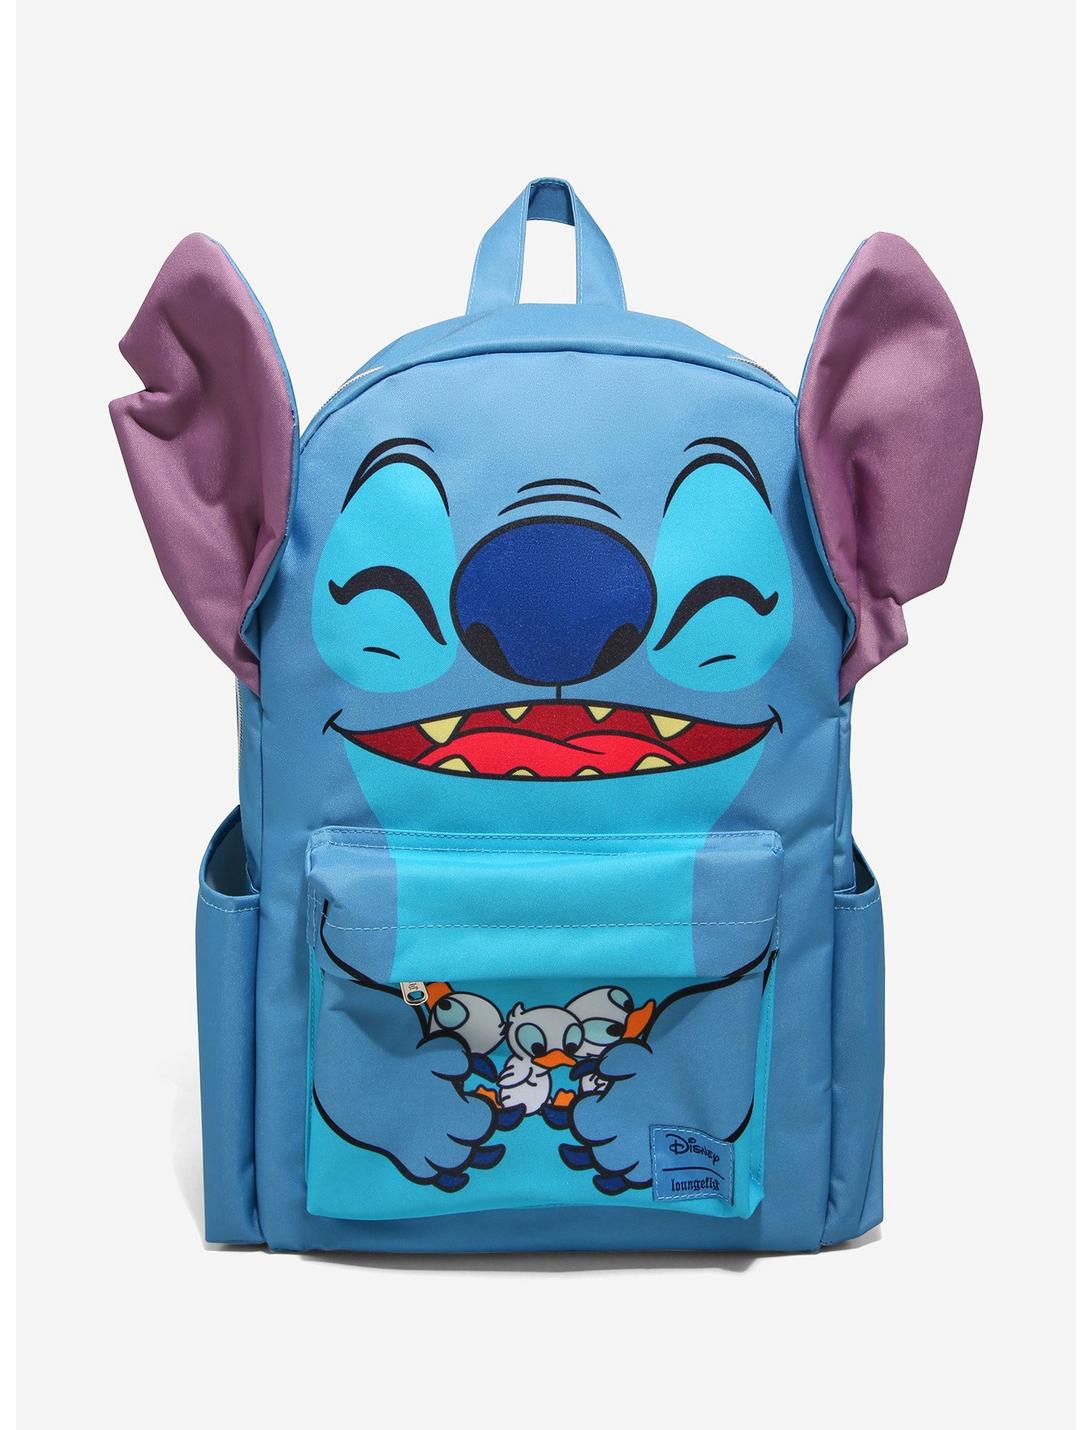 Loungefly Disney Lilo & Stitch Ducks 3D Backpack, , hi-res